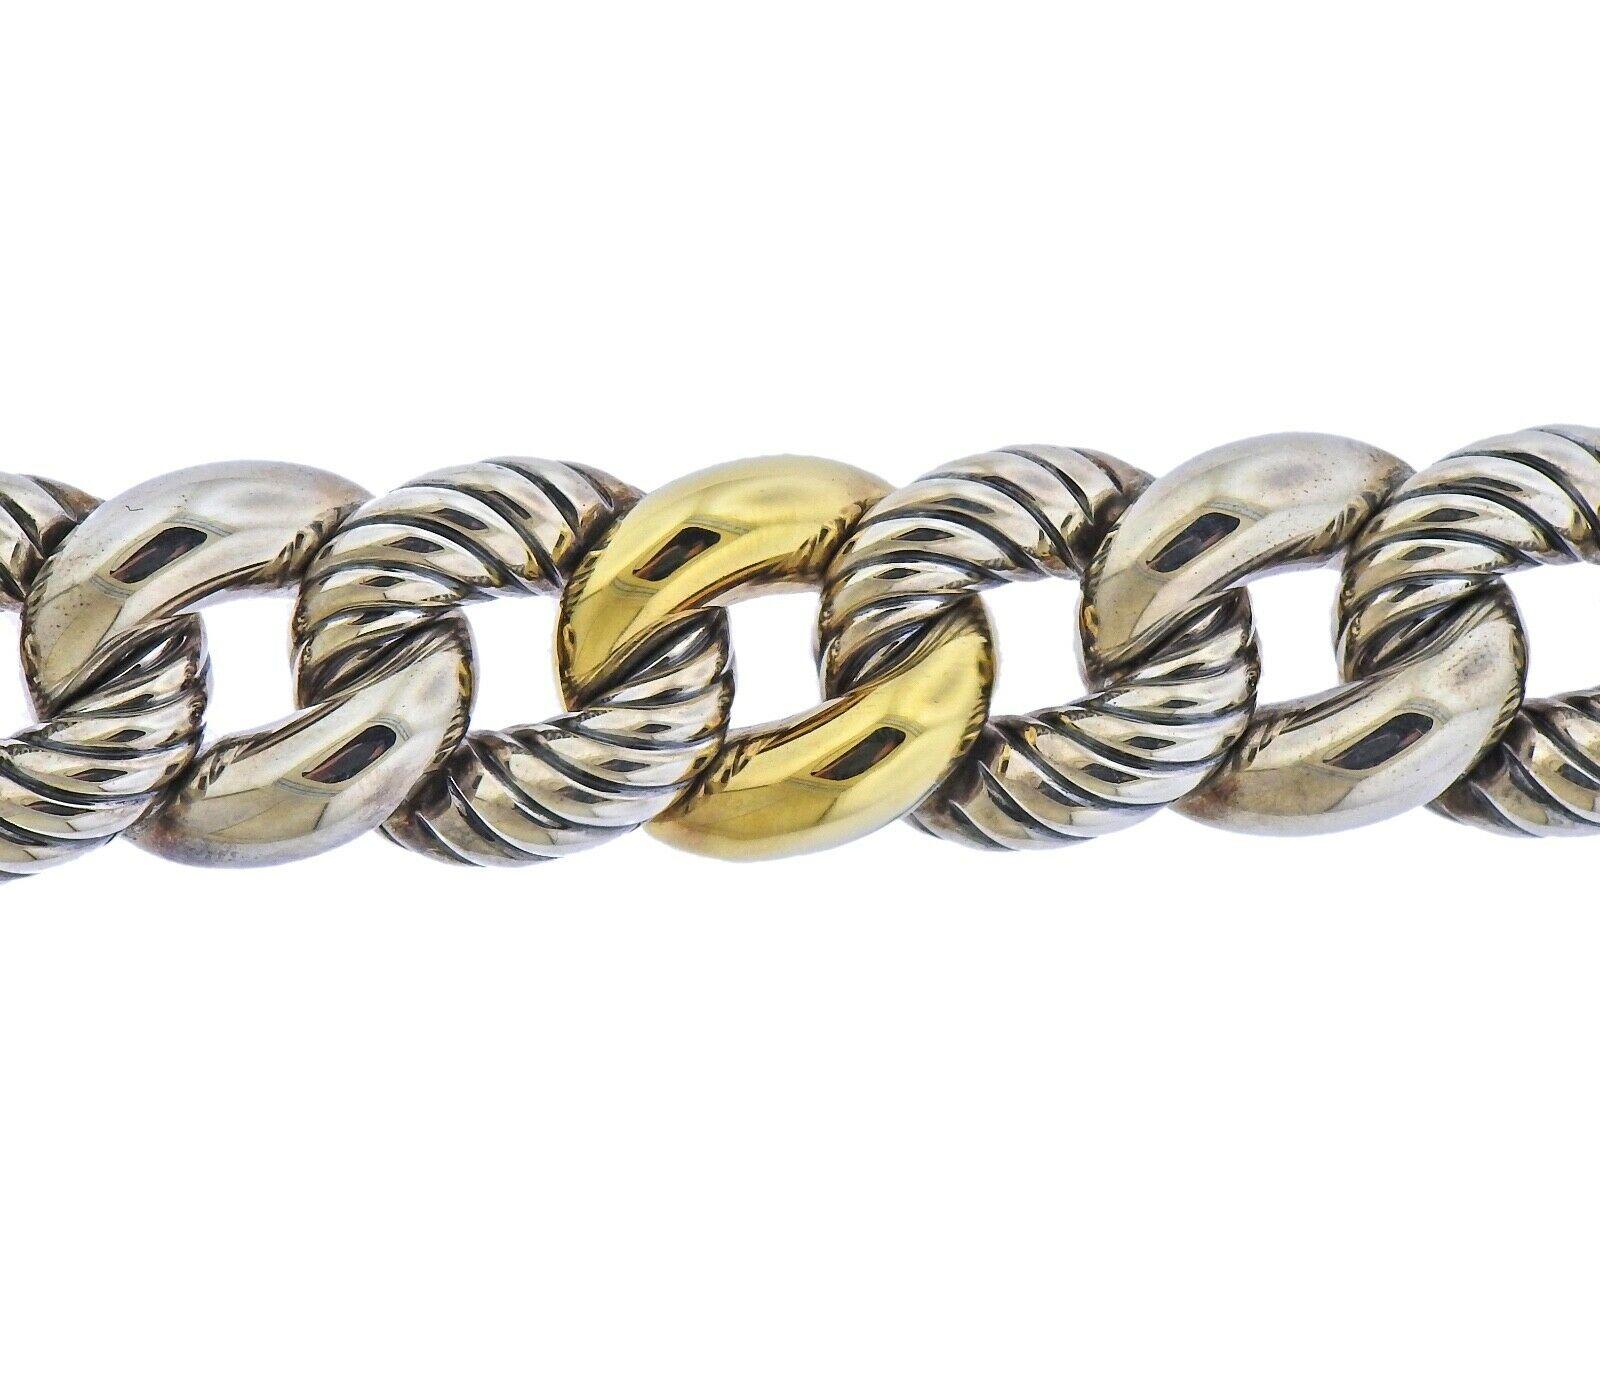 New 18k gold and sterling silver Belmont curb link bracelet by David Yurman. Retail $2000. With box.  Bracelet is 7.5